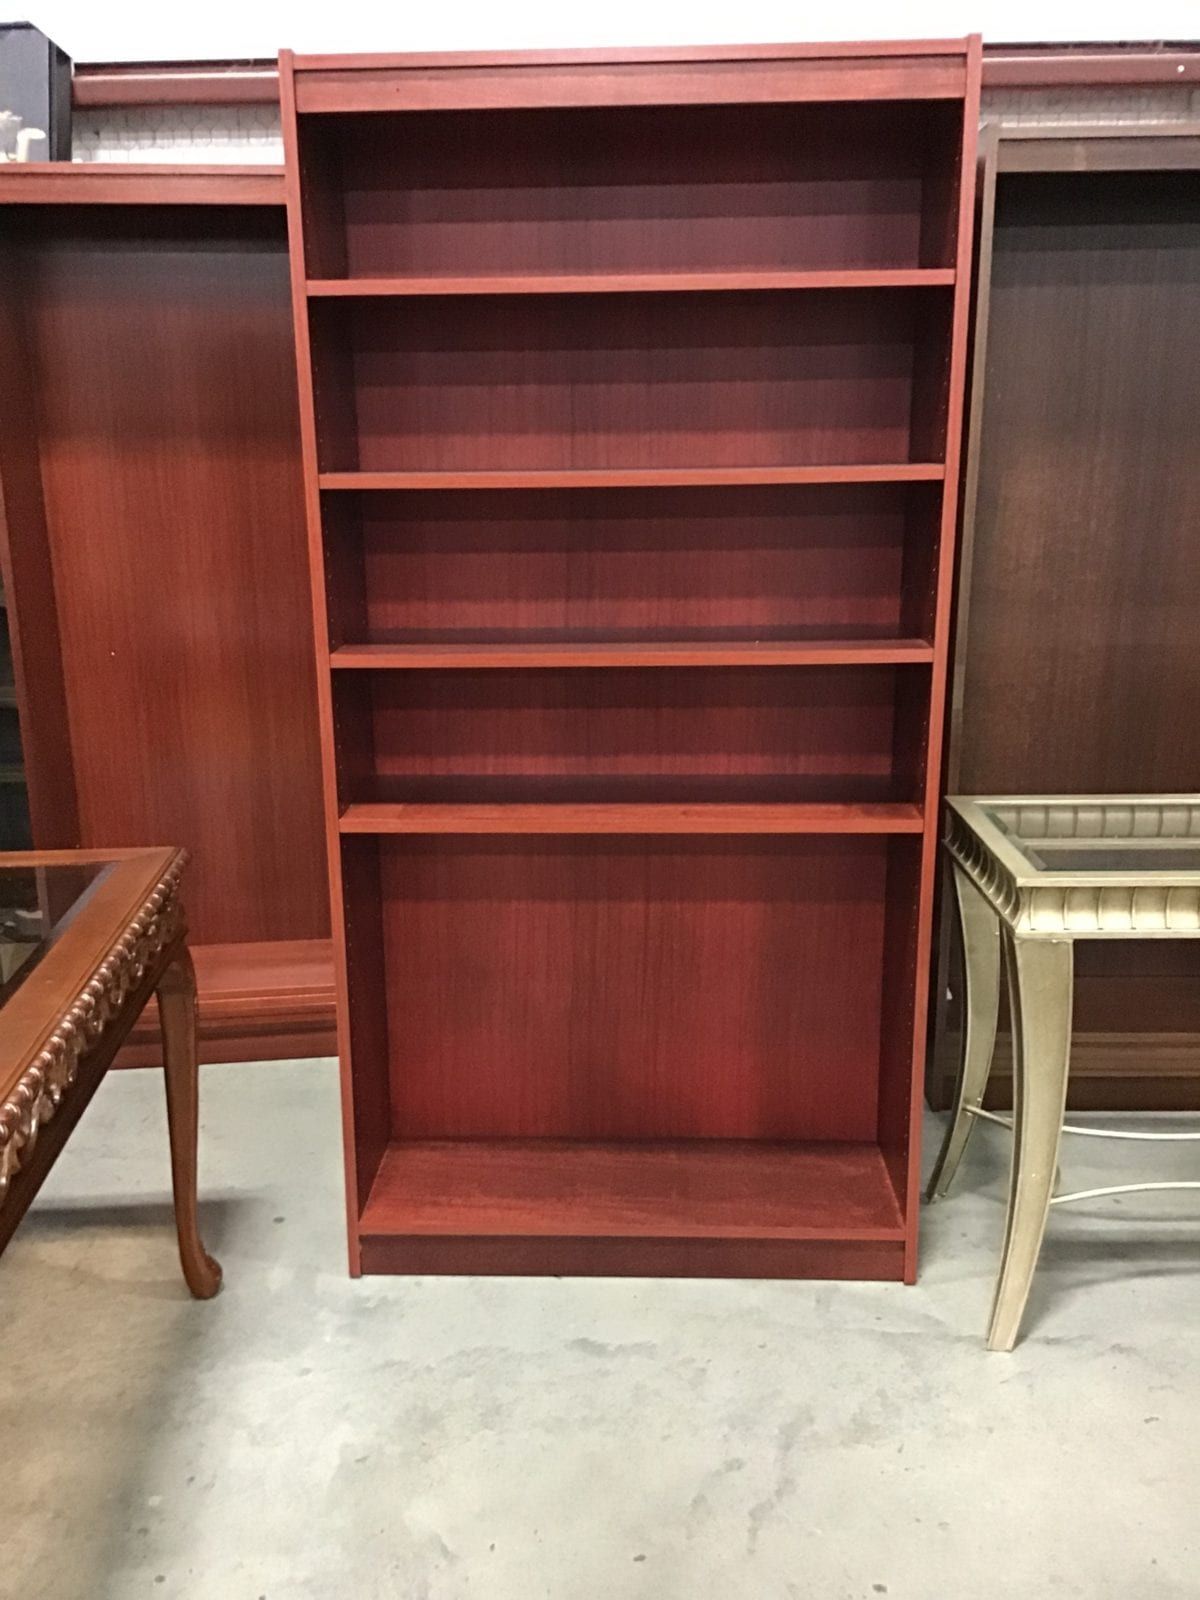 72" X 36" Cherry Bookcase By: Norsons | Office Barn In Cherry Bookcases (View 6 of 15)